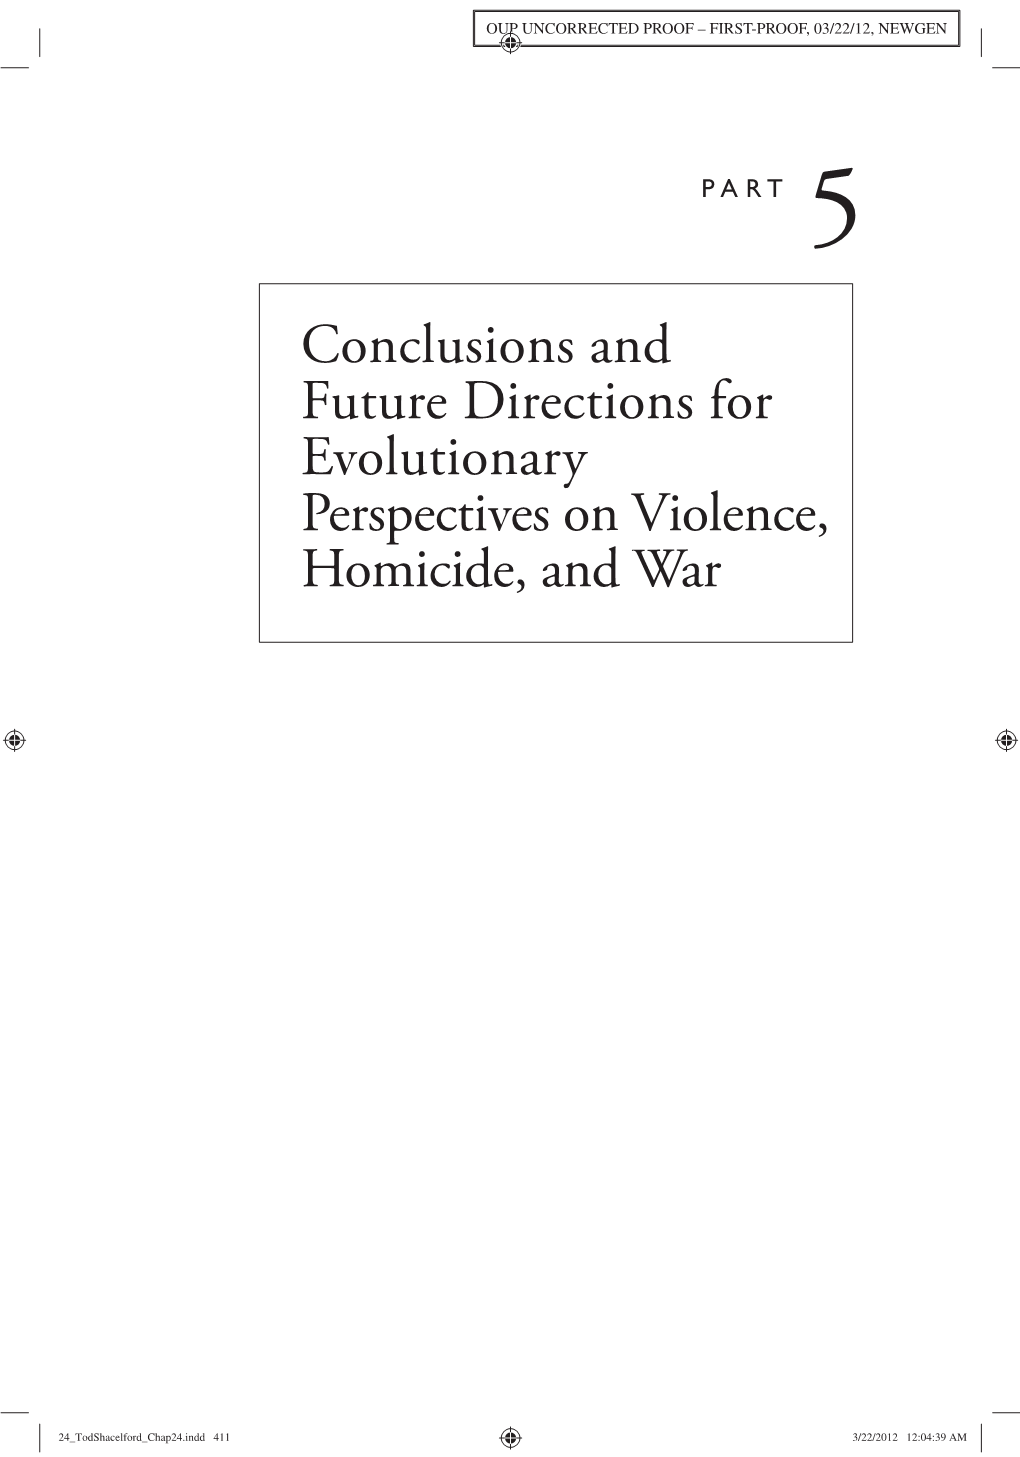 The Extremes of Conflict in Literature: Violence, Homicide, And